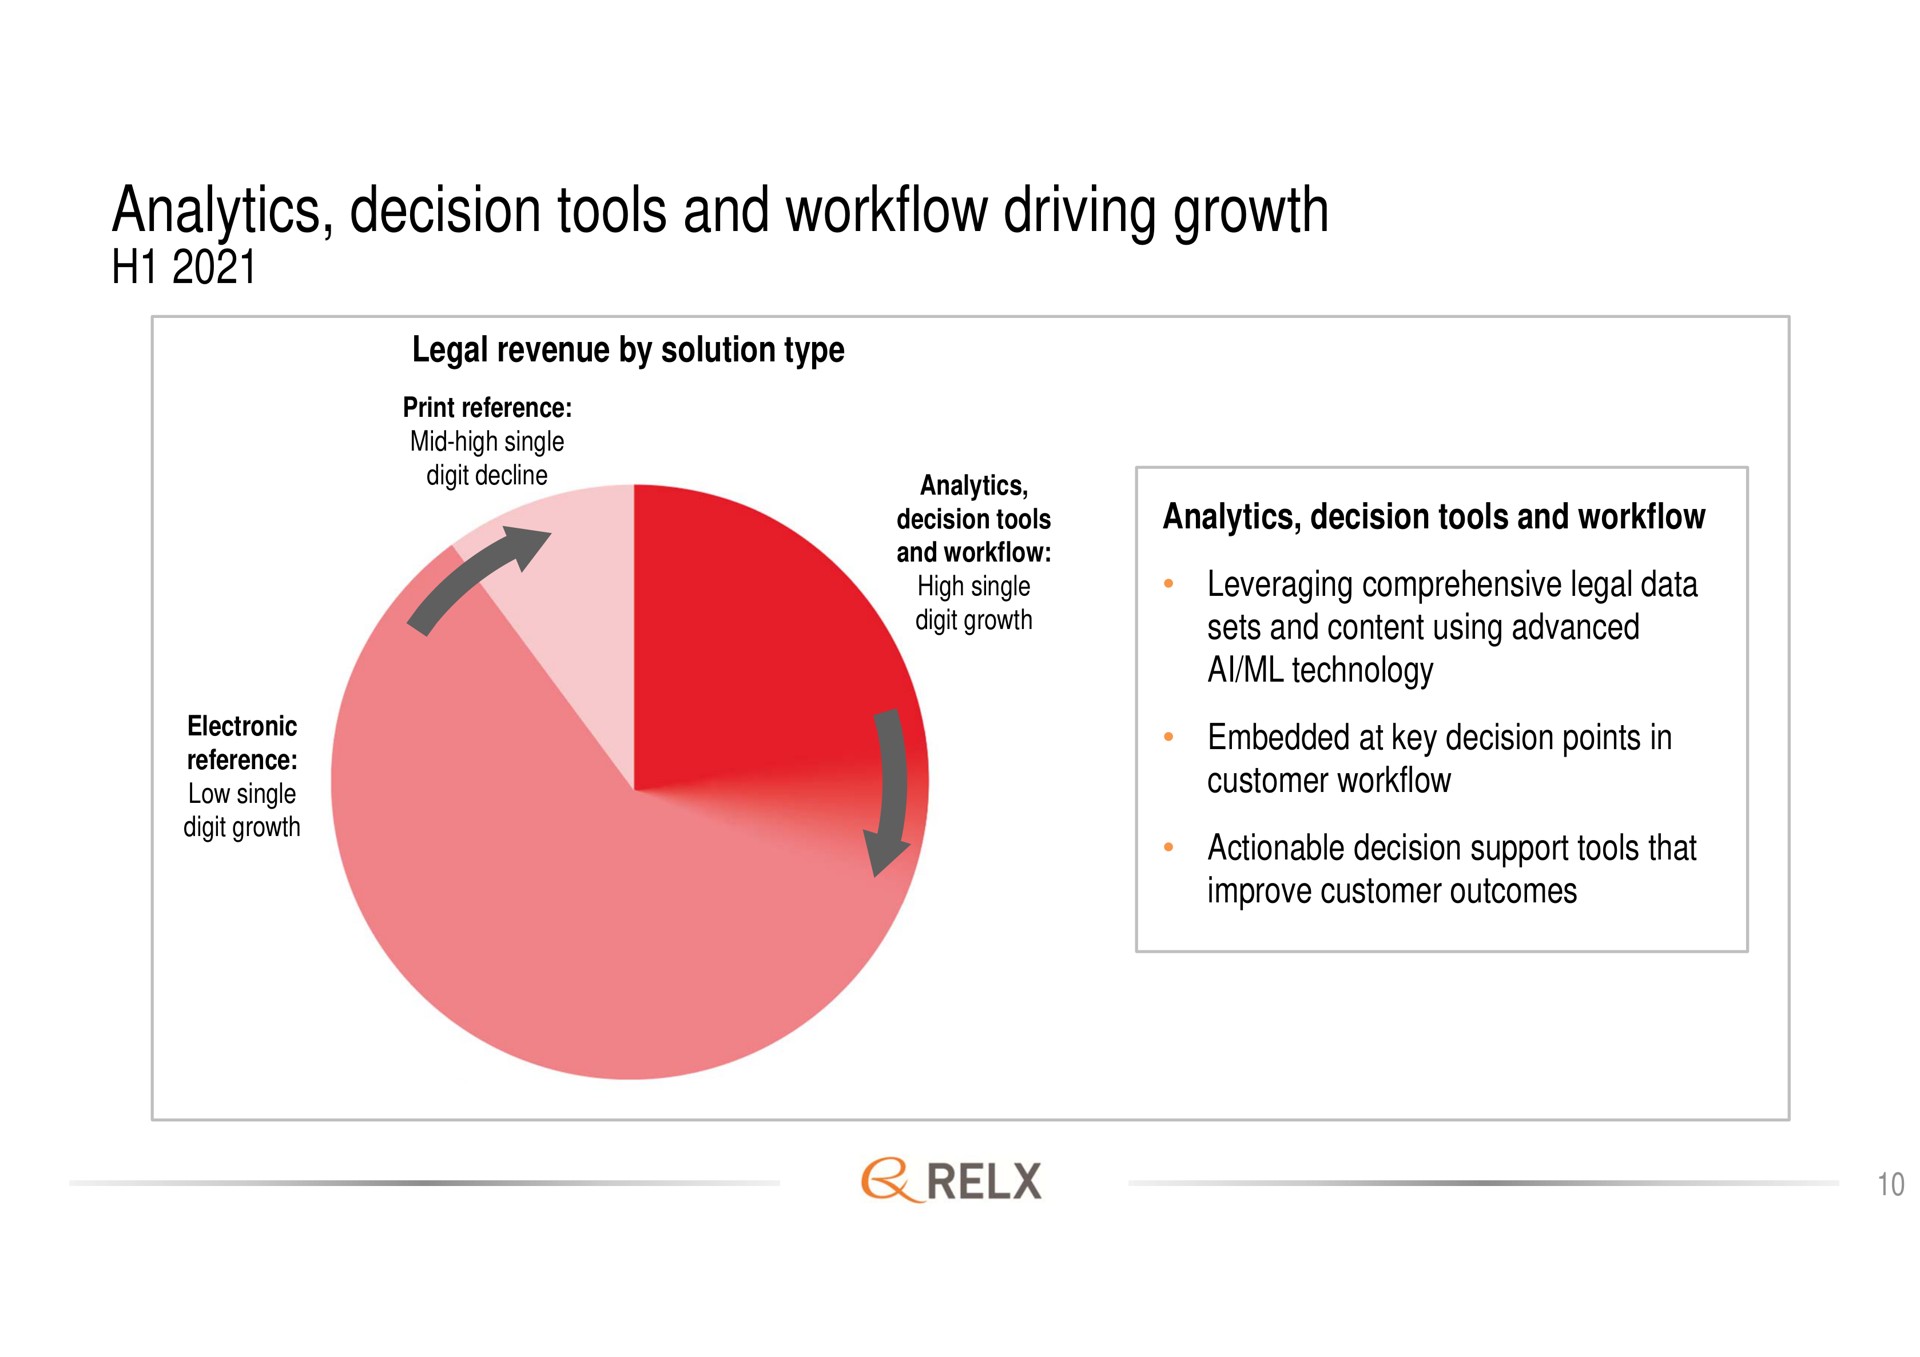 analytics decision tools and driving growth | RELX